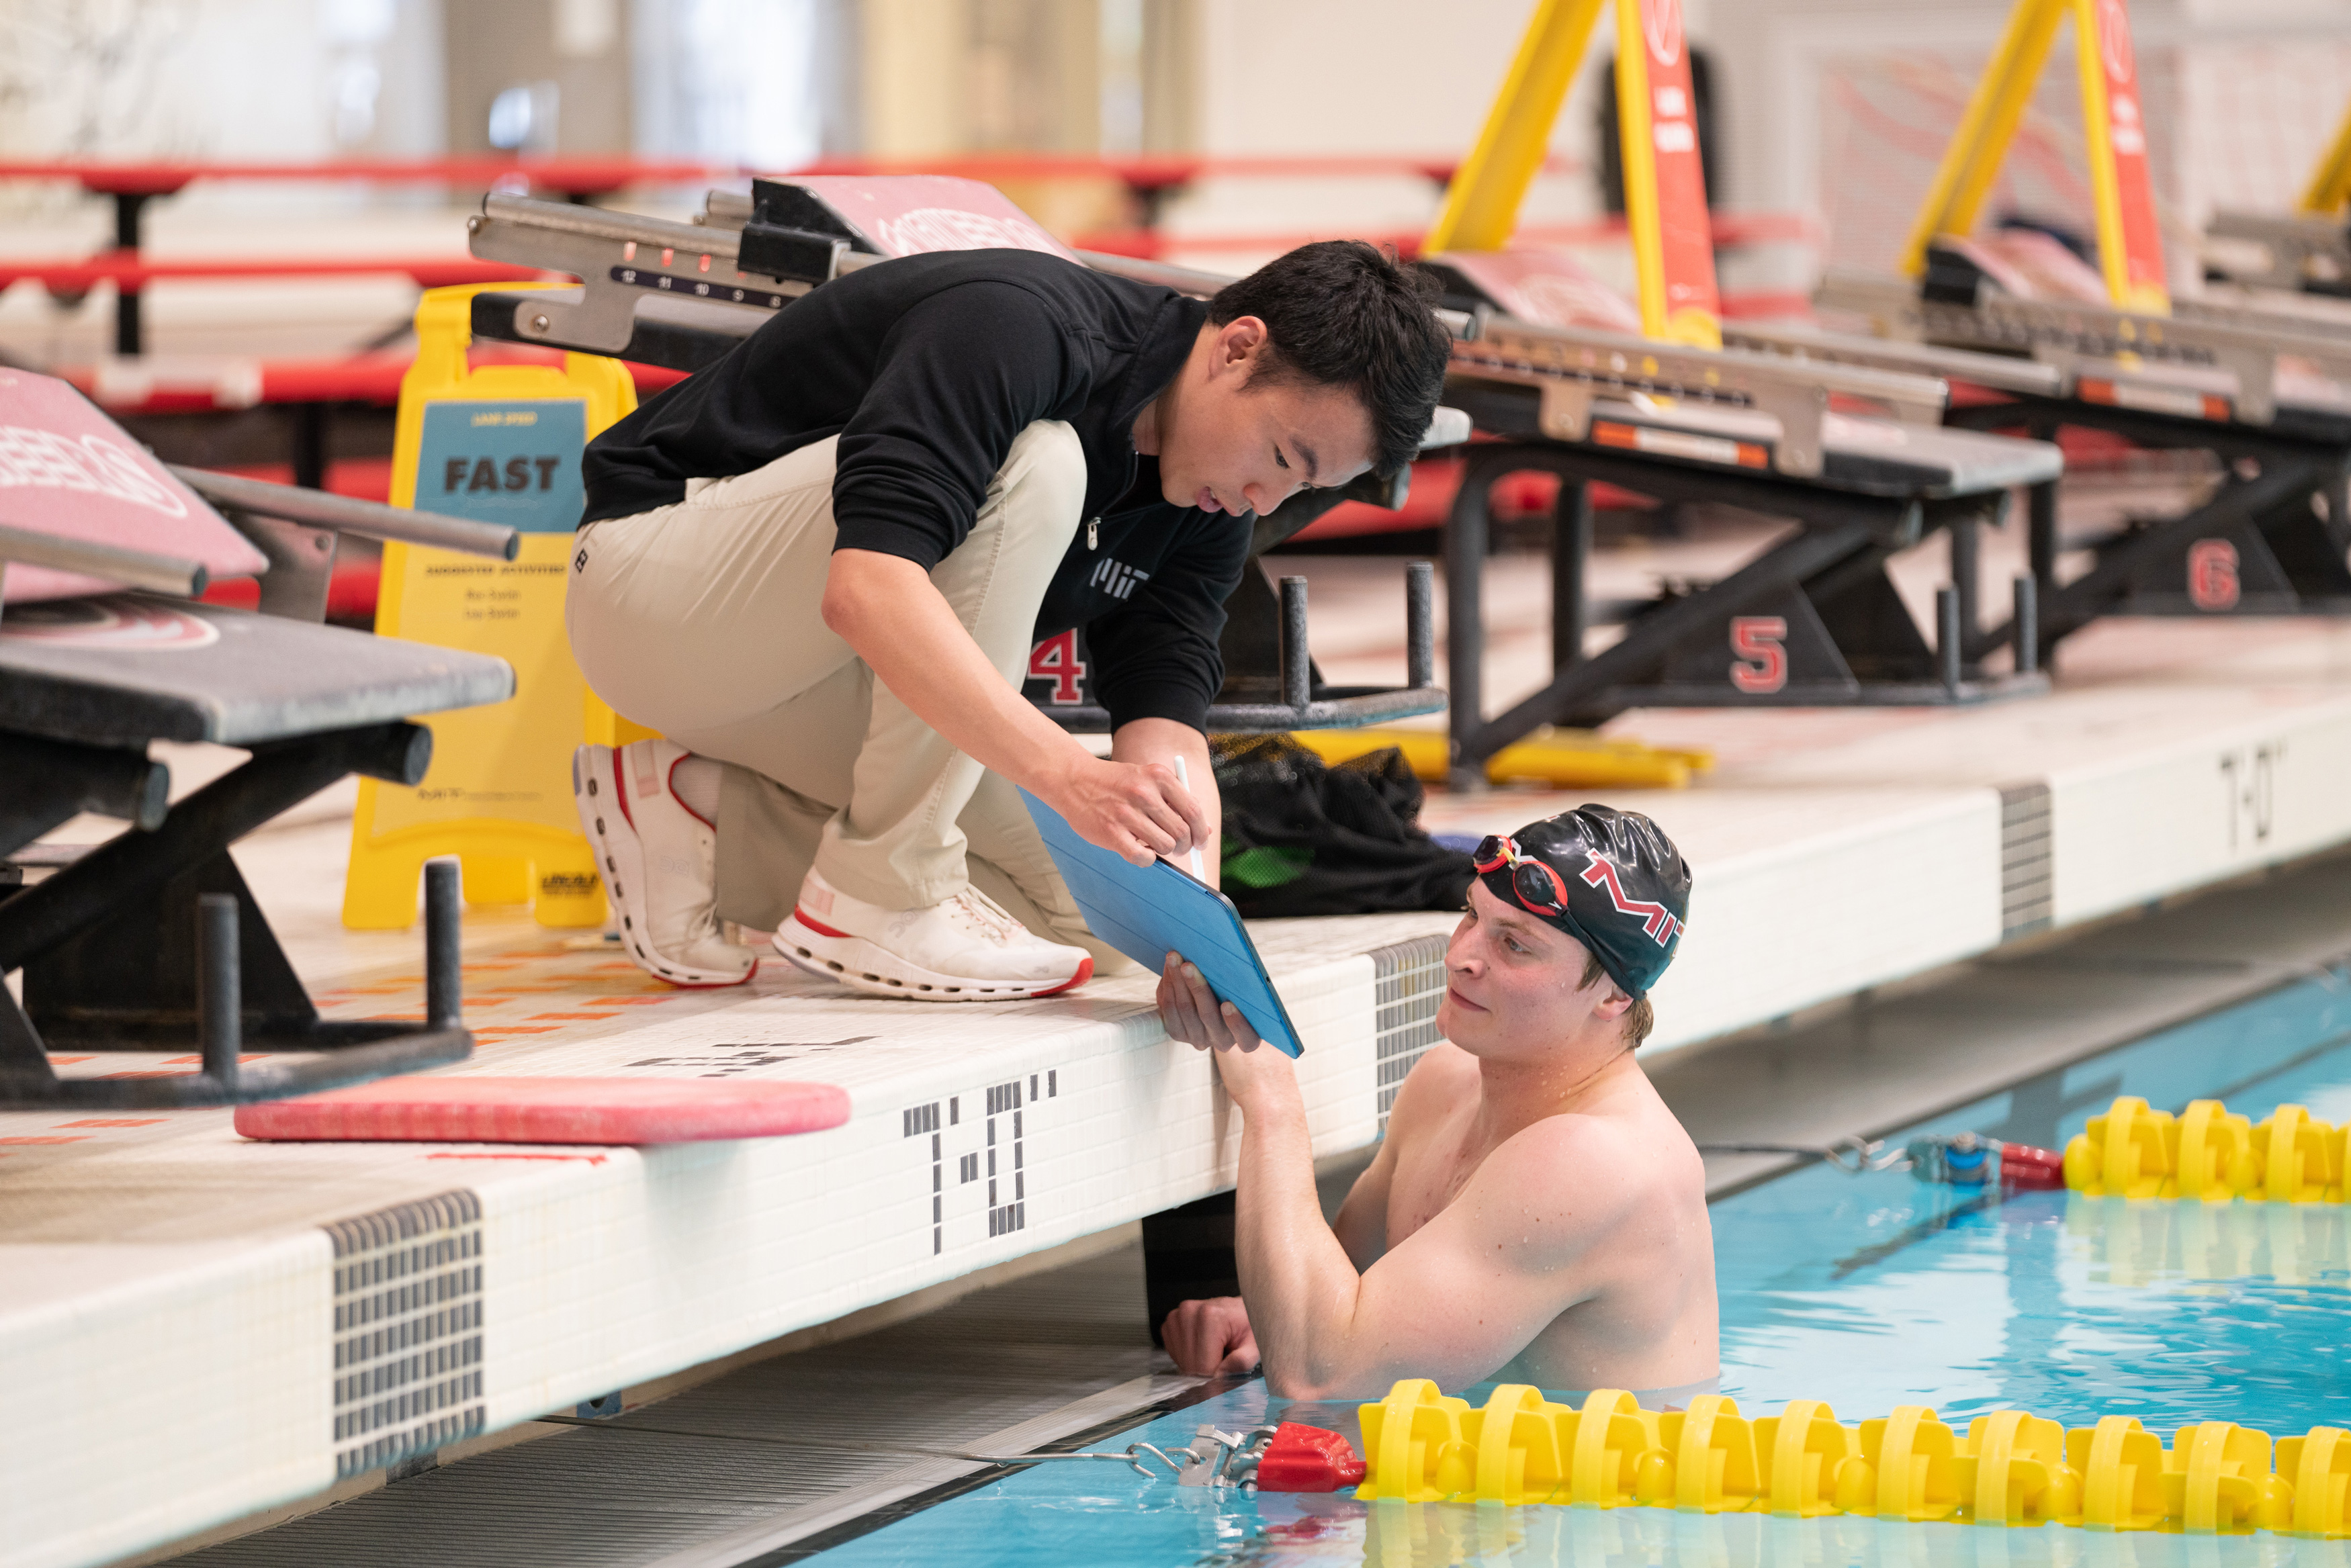 A former competitive swimmer, MIT graduate student Jerry Lu works to optimize the performance of elite athletes and their sporting organizations. Here, Jerry Lu, left, works with grad student Anatole Borisov to increase his performance in the pool.